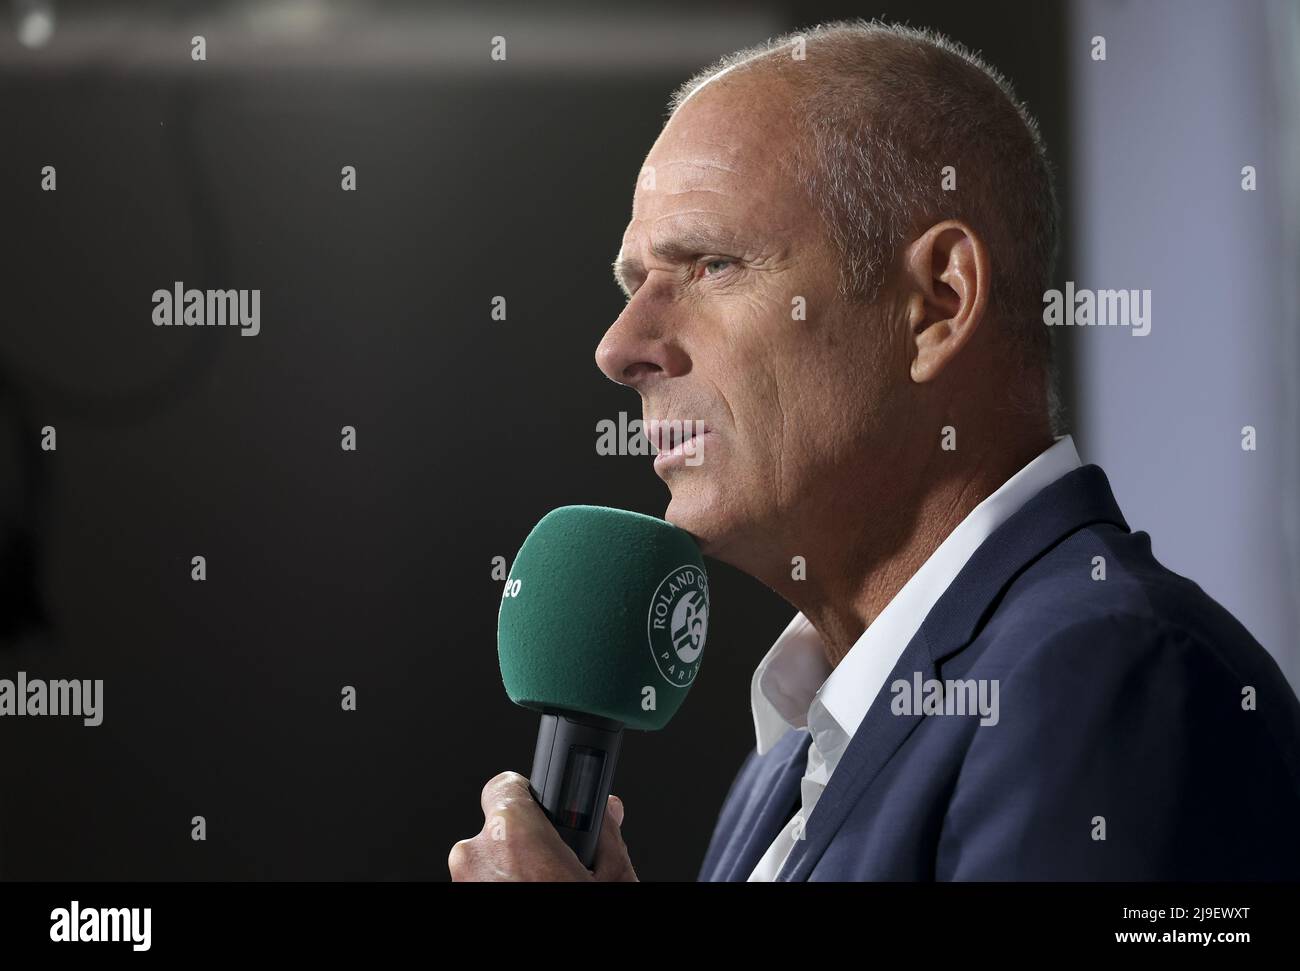 May 22, 2022, Paris, France: Guy Forget comments for Amazon Prime Video day  1 of the French Open 2022, a tennis Grand Slam tournament on May 22, 2022  at Roland-Garros stadium in